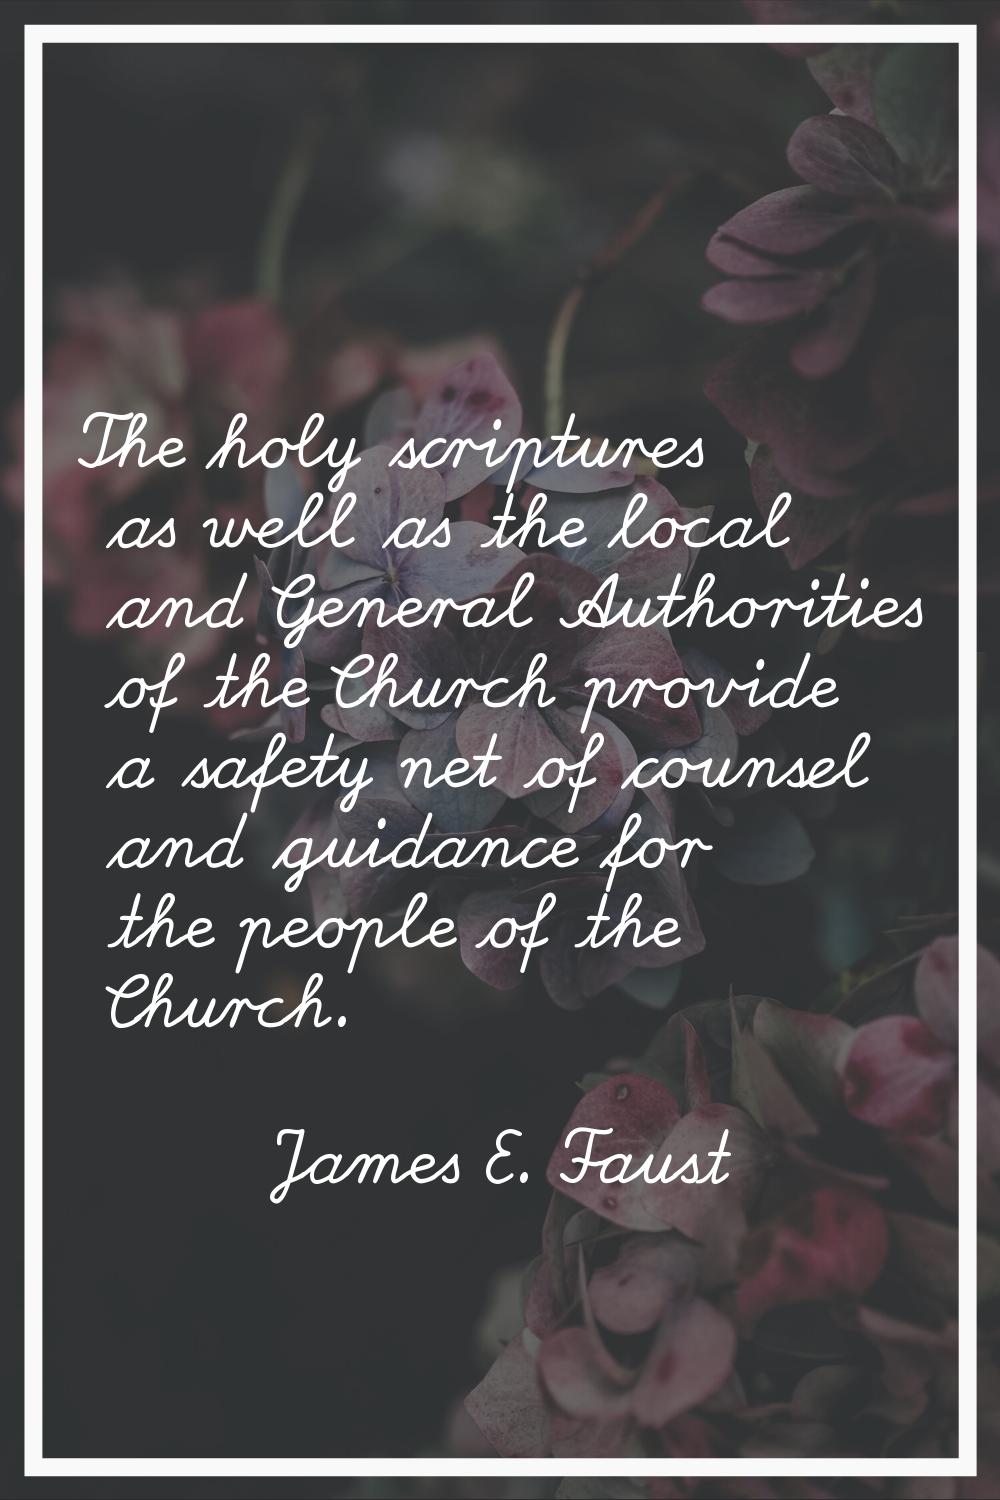 The holy scriptures as well as the local and General Authorities of the Church provide a safety net